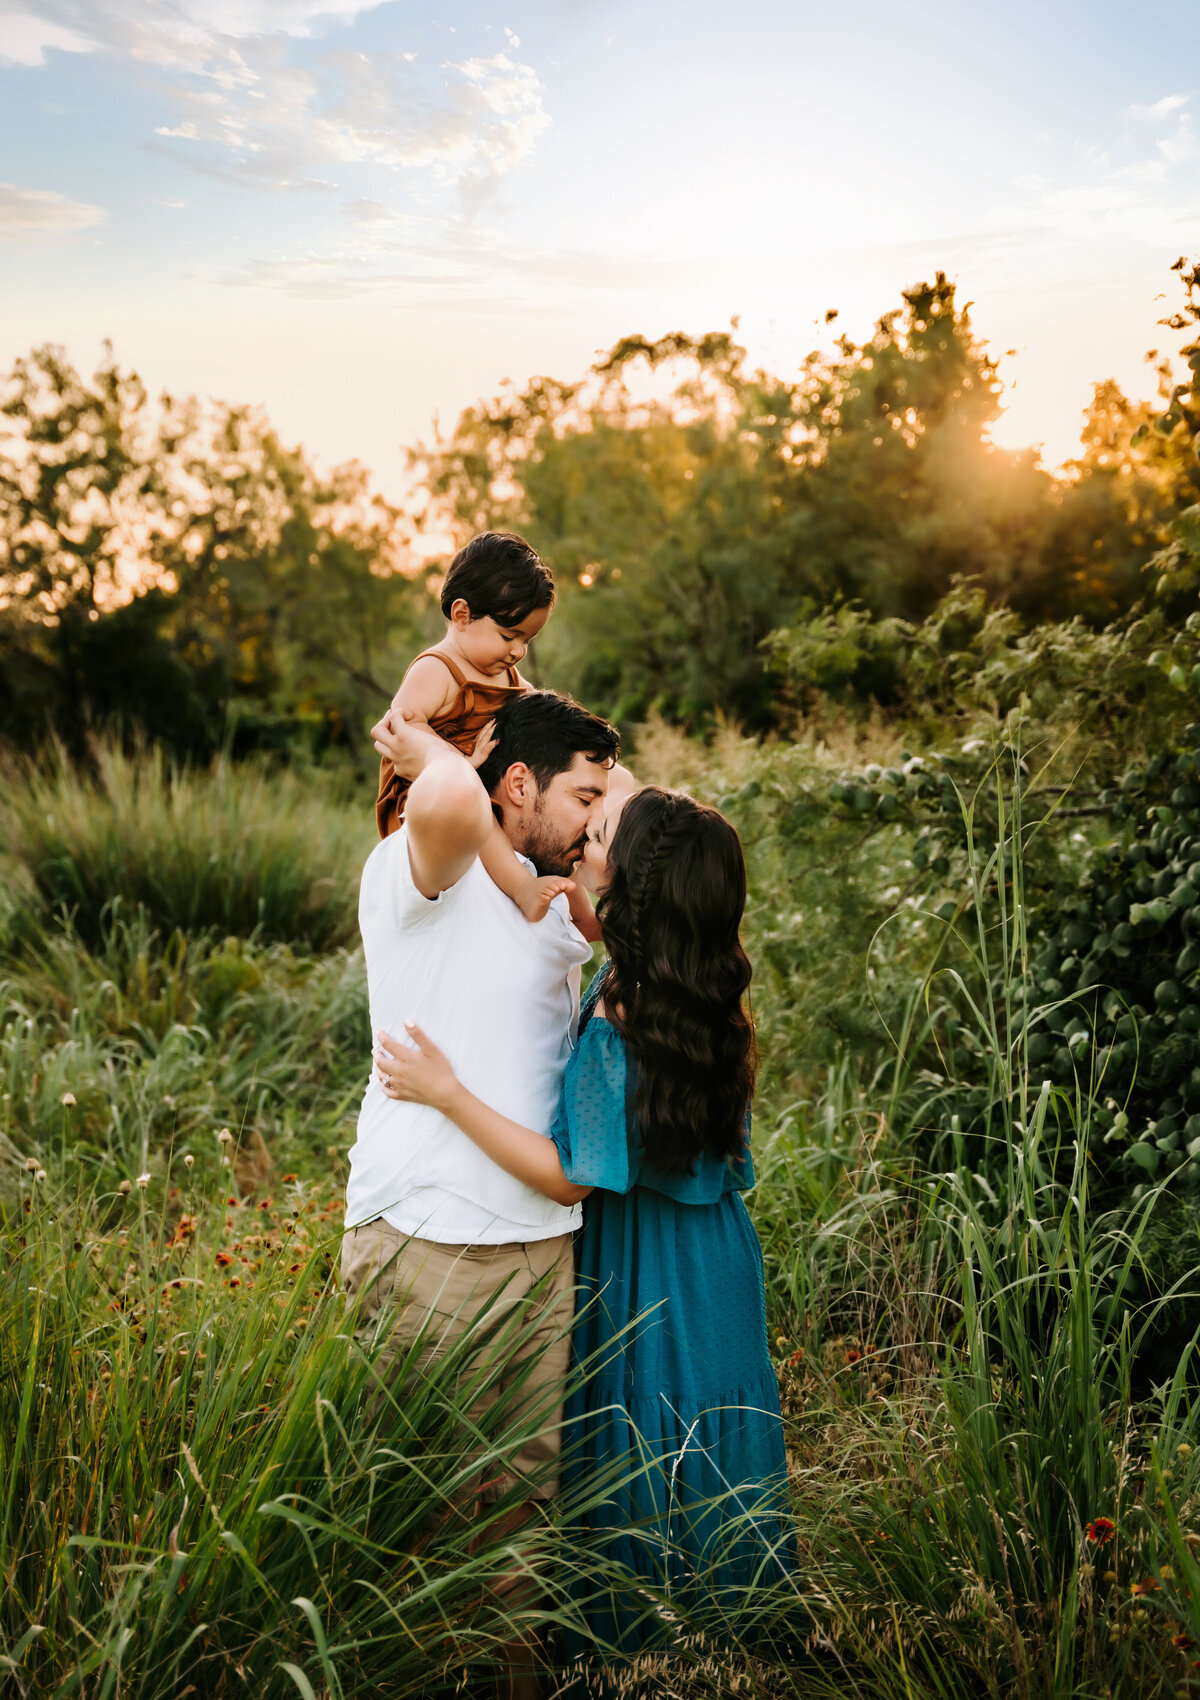 Family Photography, a man kisses his wife, baby on his shoulders